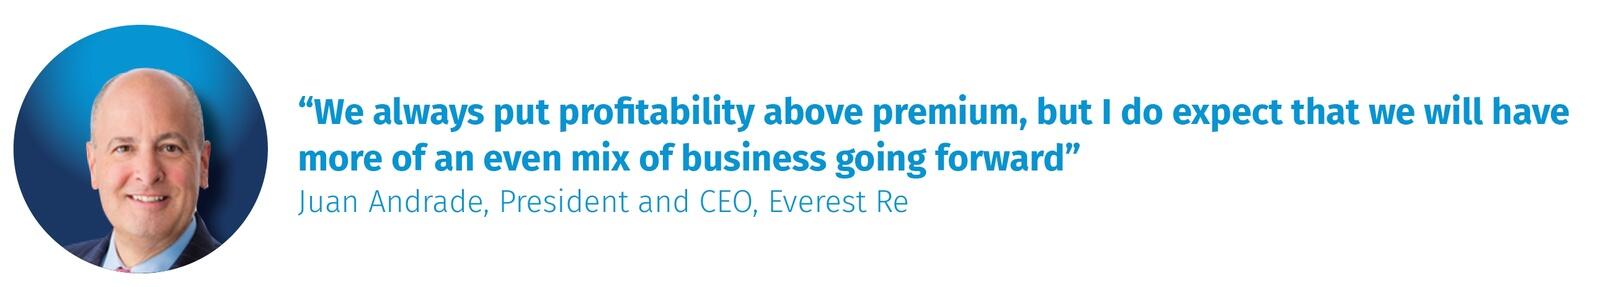 Juan Andrade, President and CEO, Everest Re